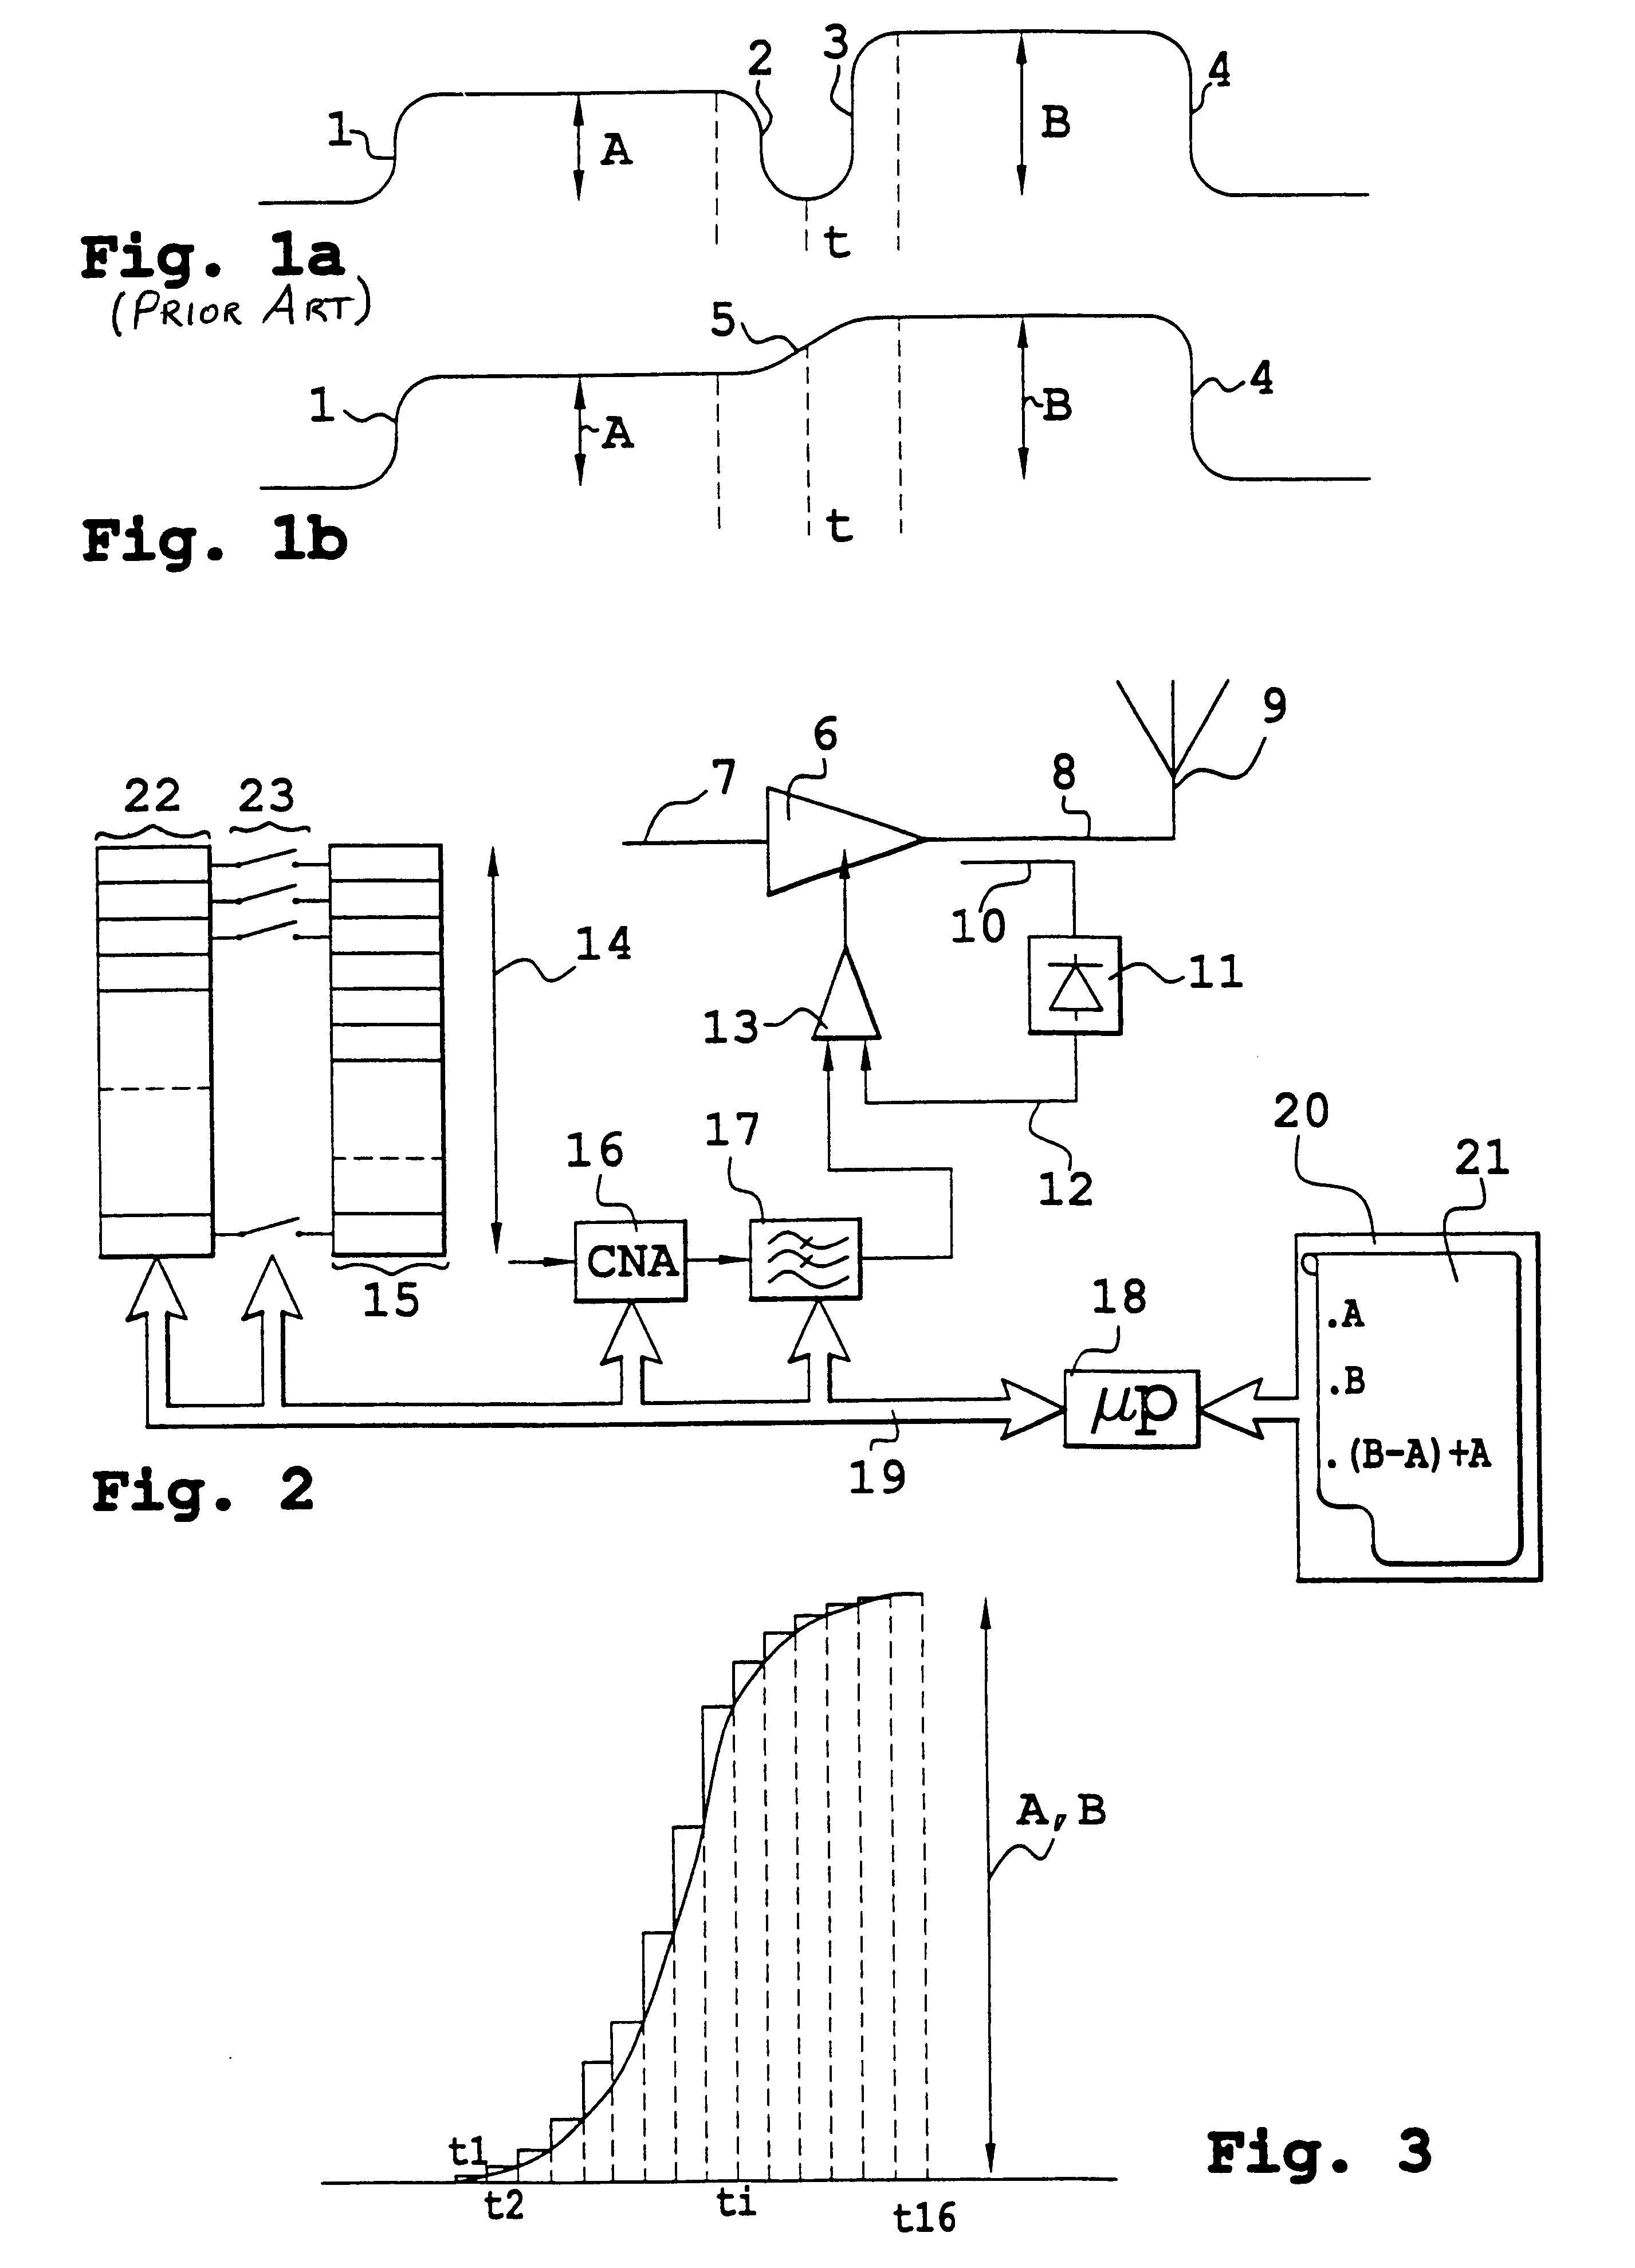 Method of transmitting in successive time slots